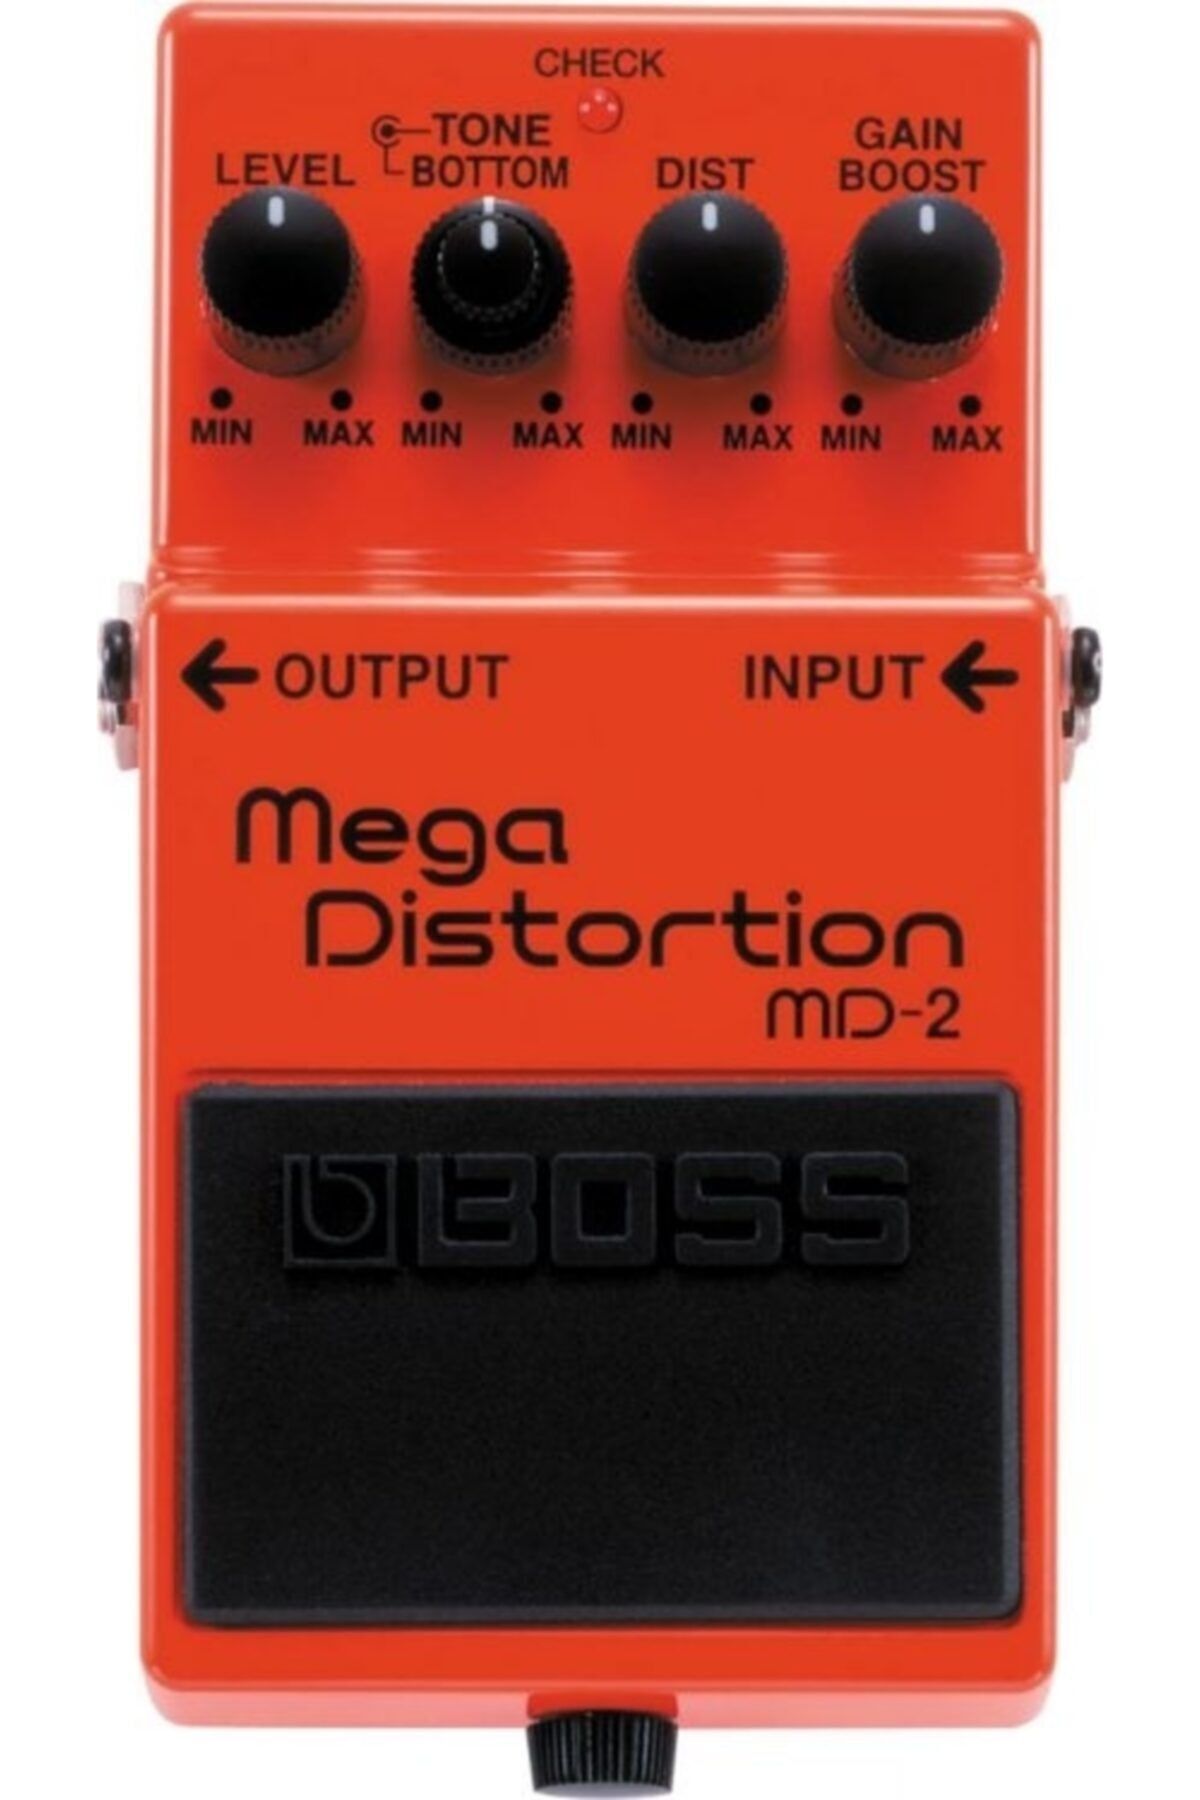 BOSS Md-2 Mega Distortion Compact Pedal